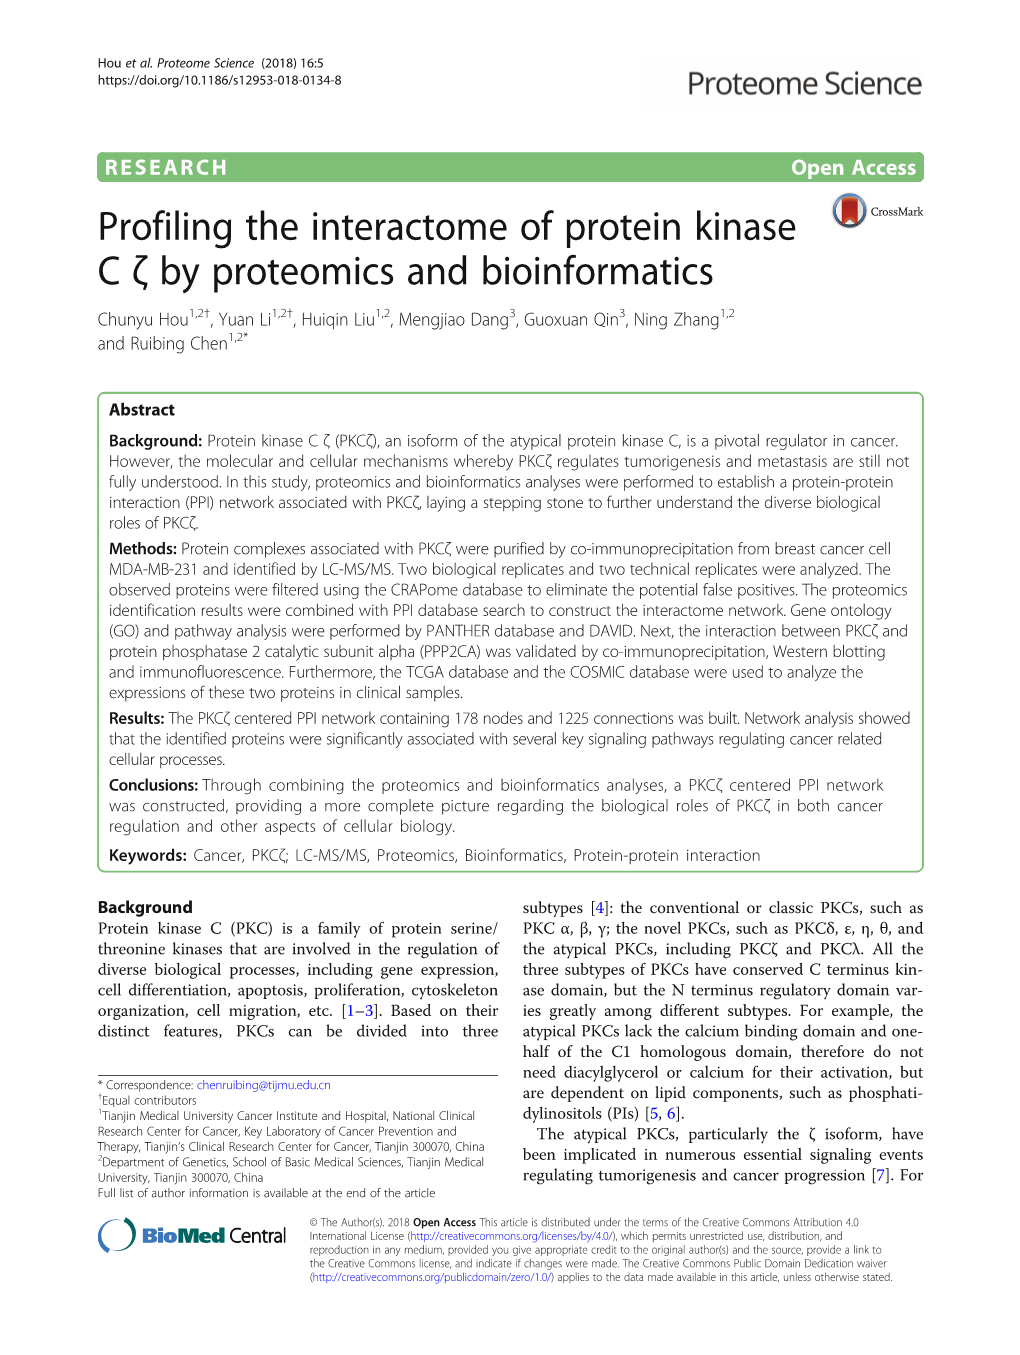 Profiling the Interactome of Protein Kinase C Ζ by Proteomics And